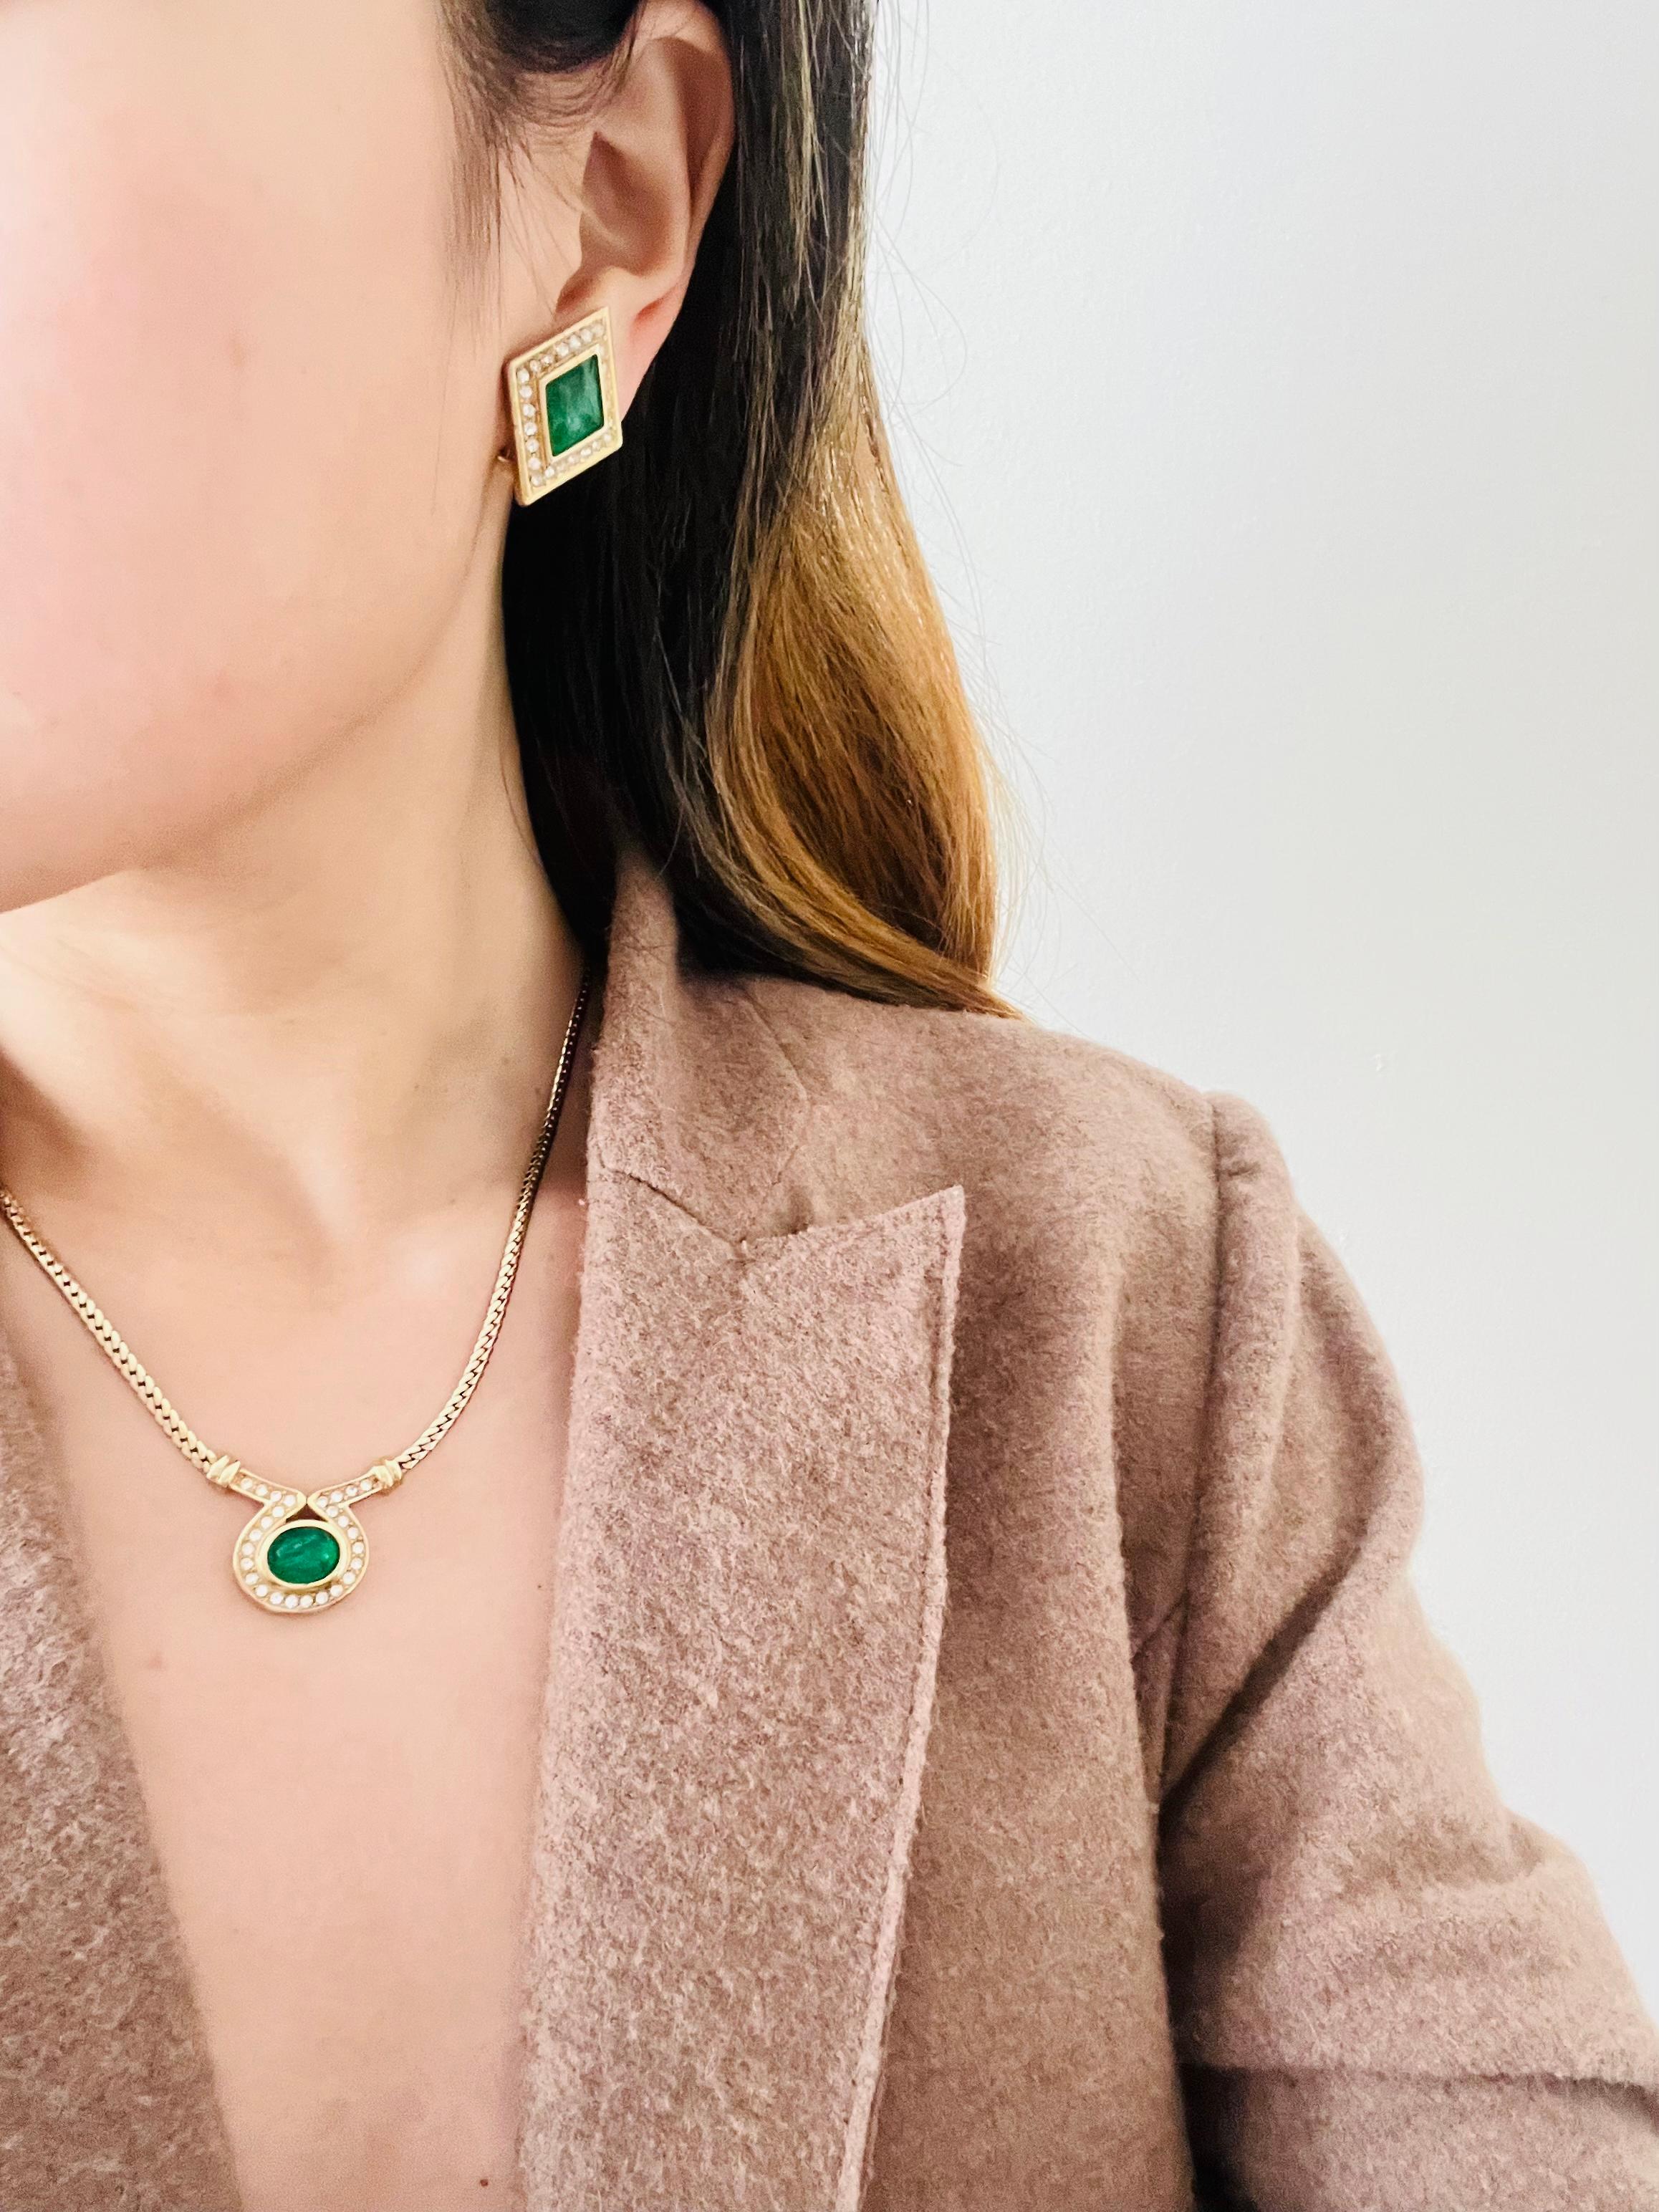 Christian Dior Vintage 1980s Emerald Green Gripoix Oval Pendant Crystal Necklace For Sale 2